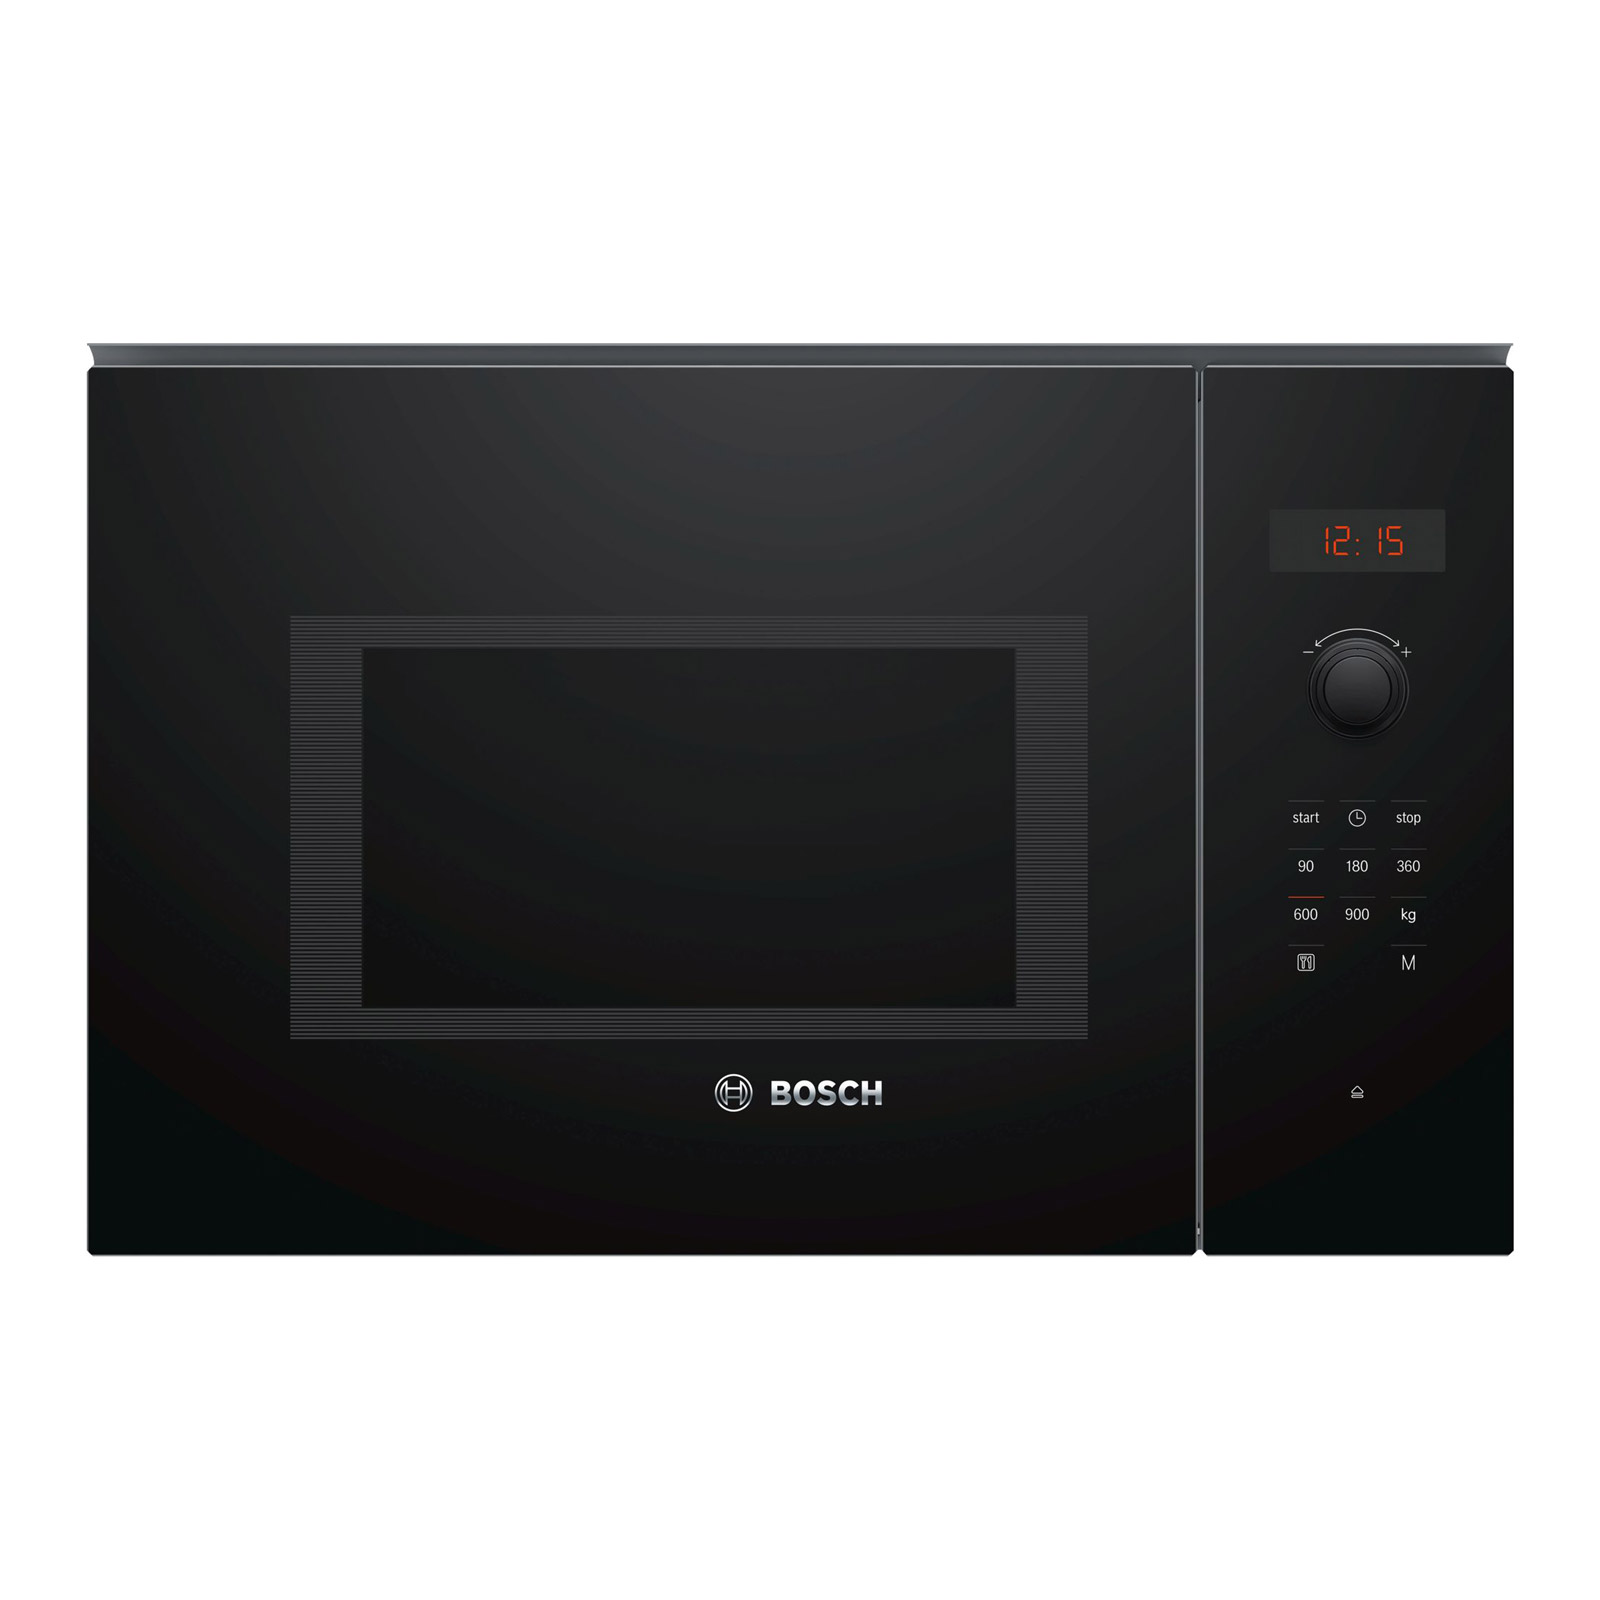 Image of Bosch BFL553MB0B Series 4 Built in Microwave Oven in Black 900W 25 Lit